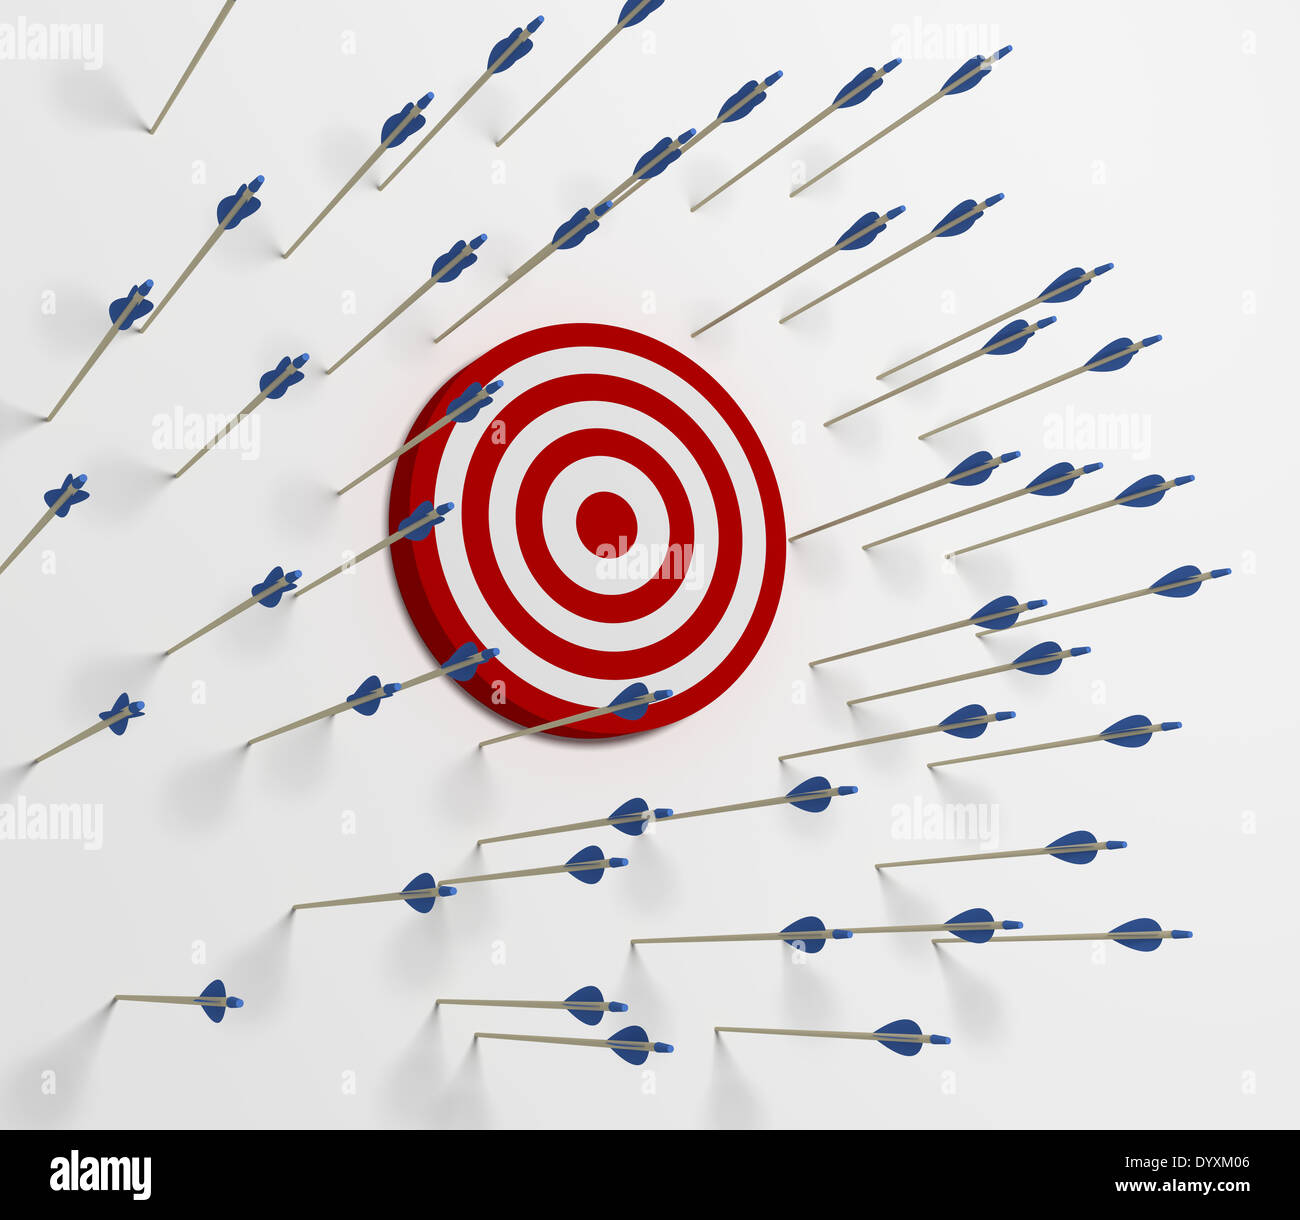 Missing Target High Resolution Stock Photography and Images - Alamy